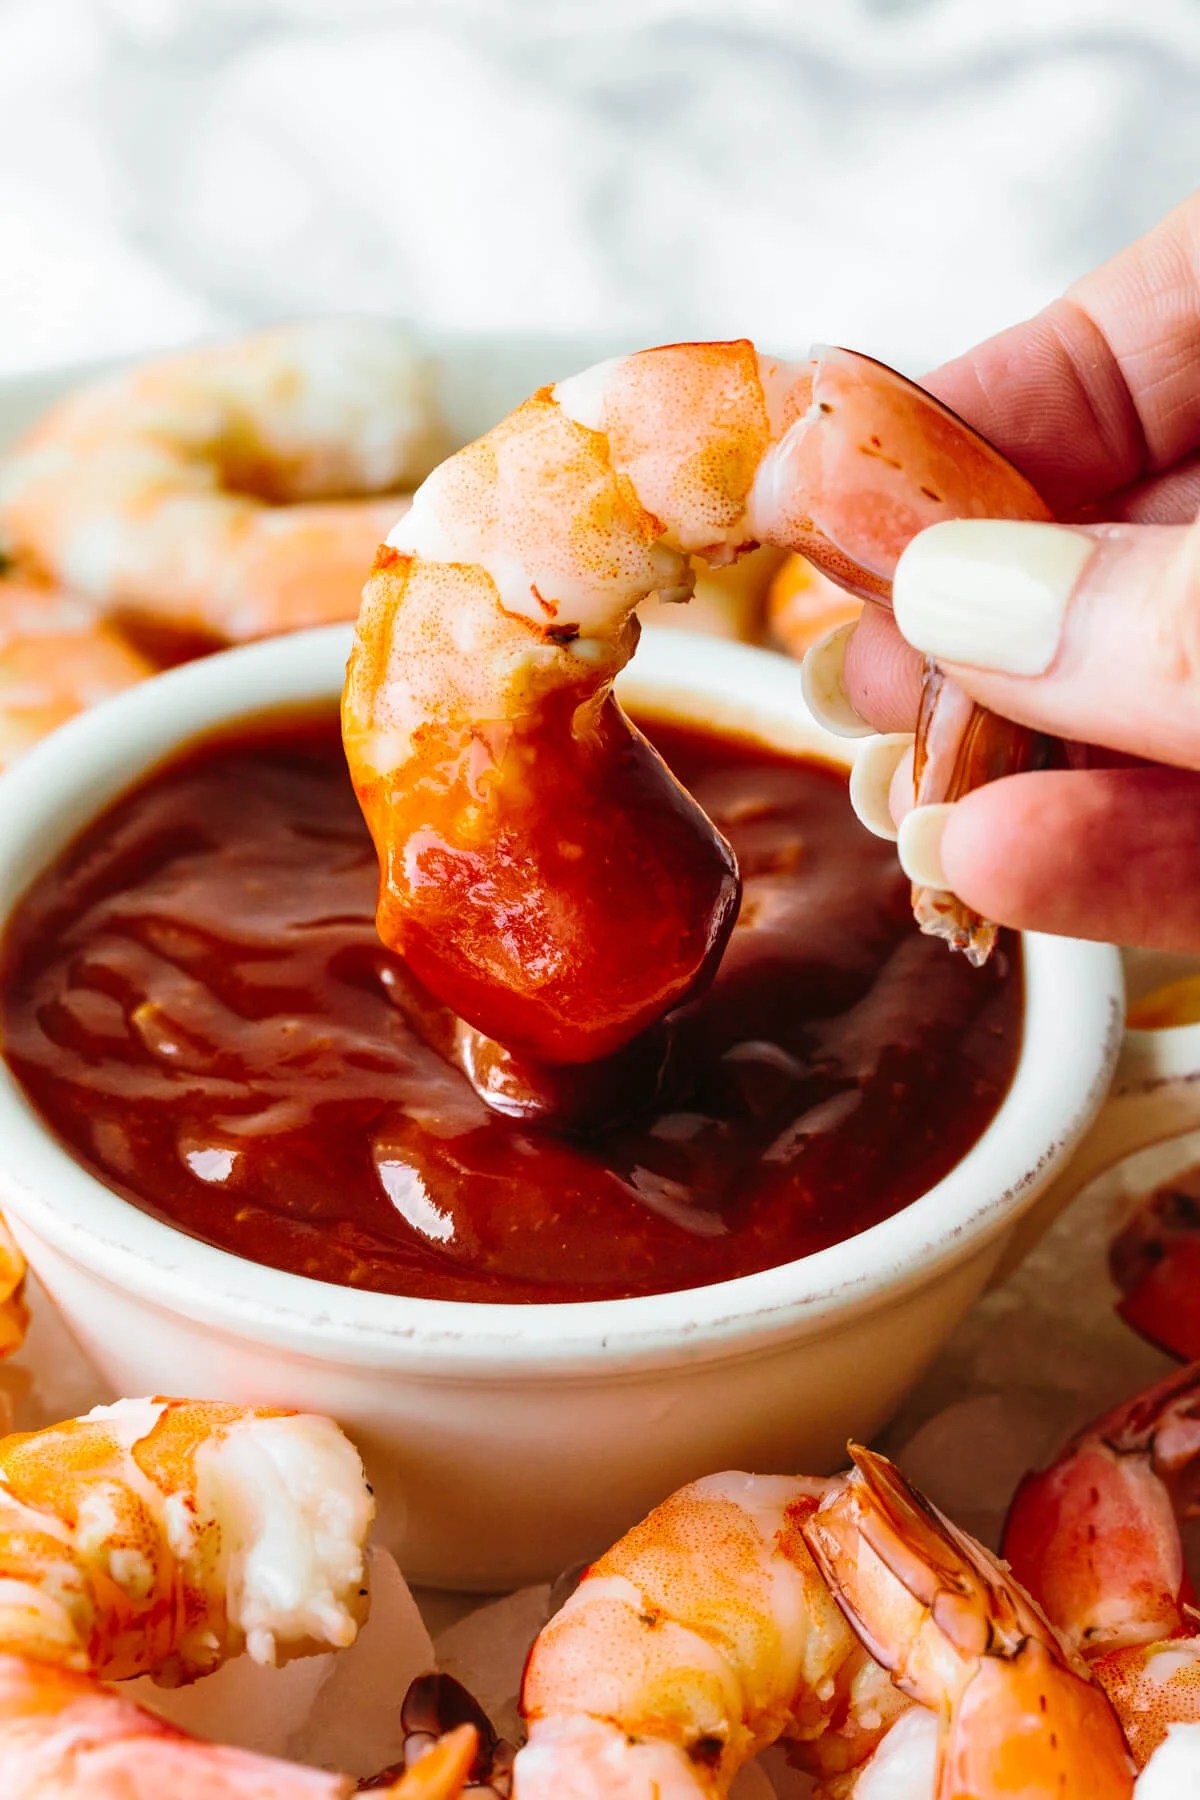 Dipping shrimp into cocktail sauce